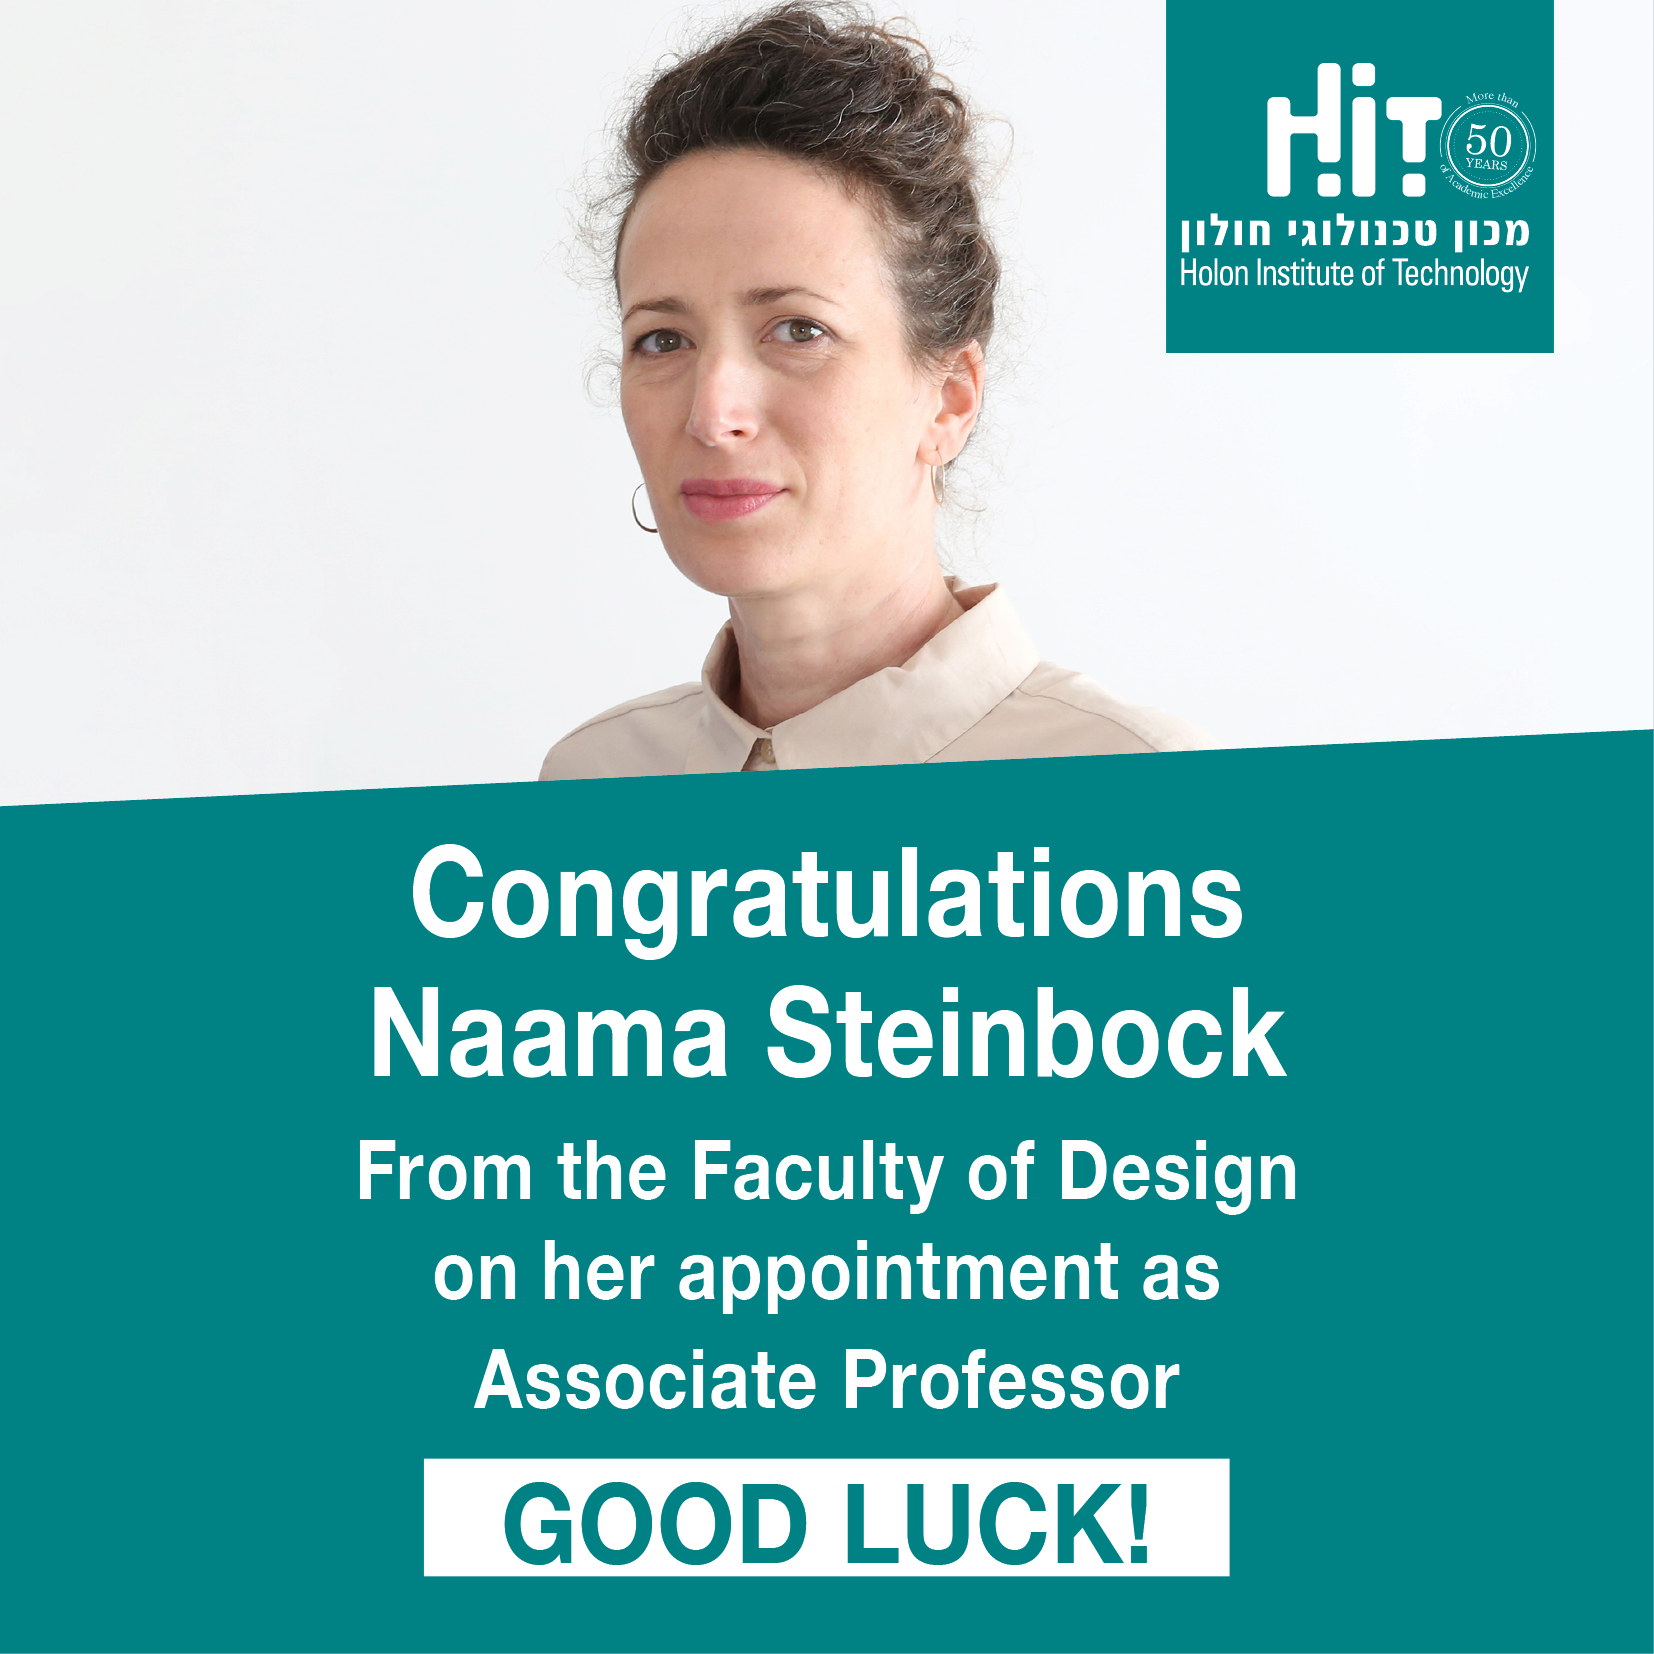 Congratulations to Naama Steinbock from the Faculty of Design on receiving a degree as an Associate Professor